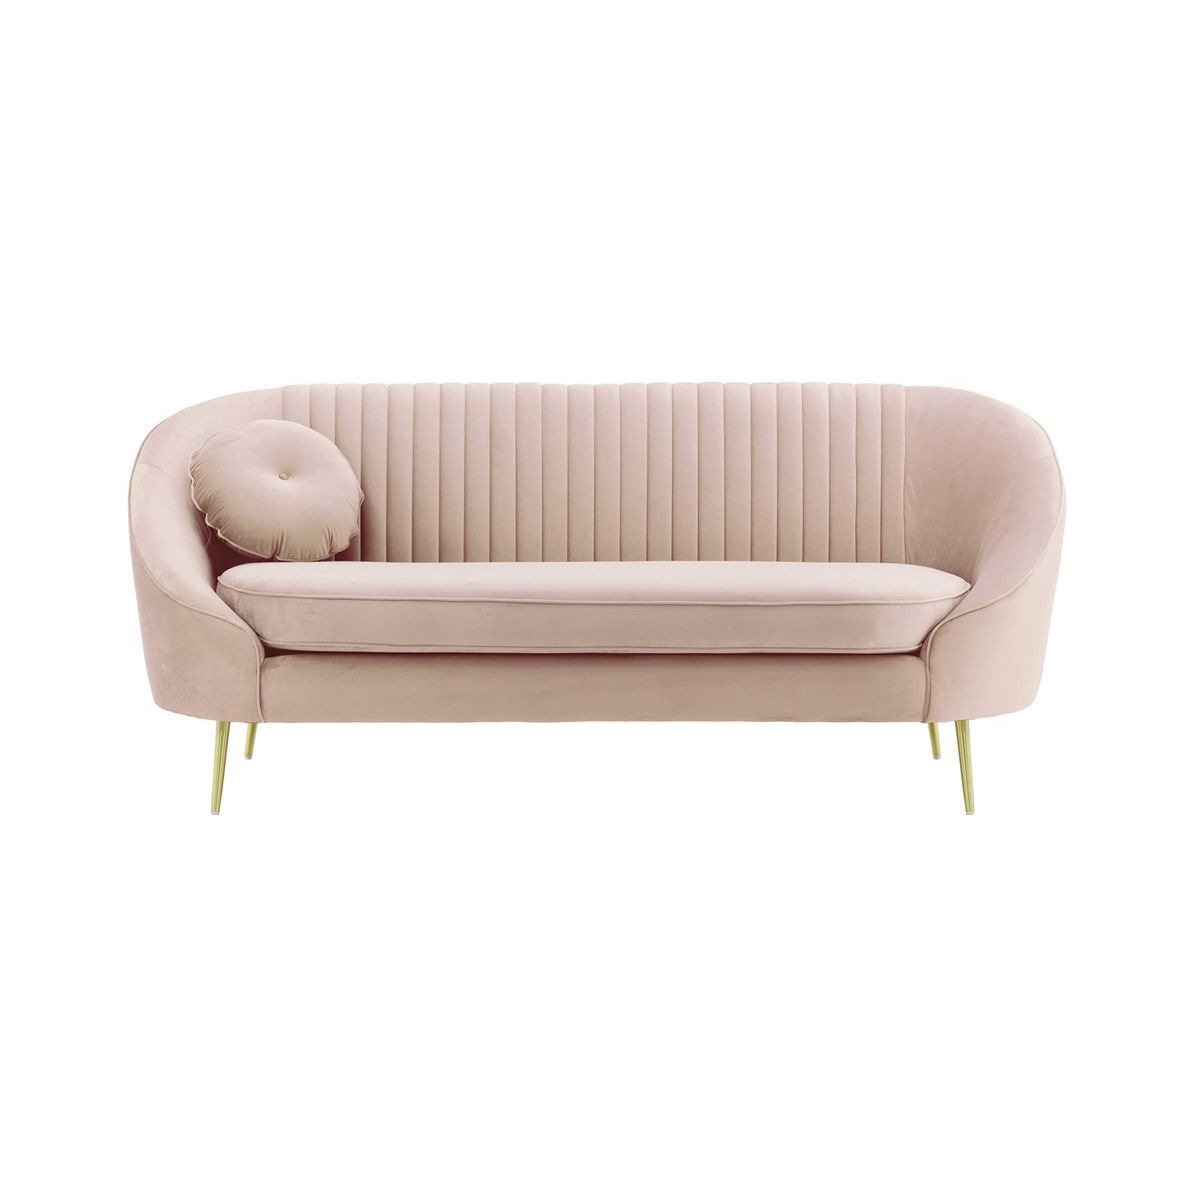 Kooper 2,5 Seater Sofa with stitching, lilac, Leg colour: gold metal - image 1